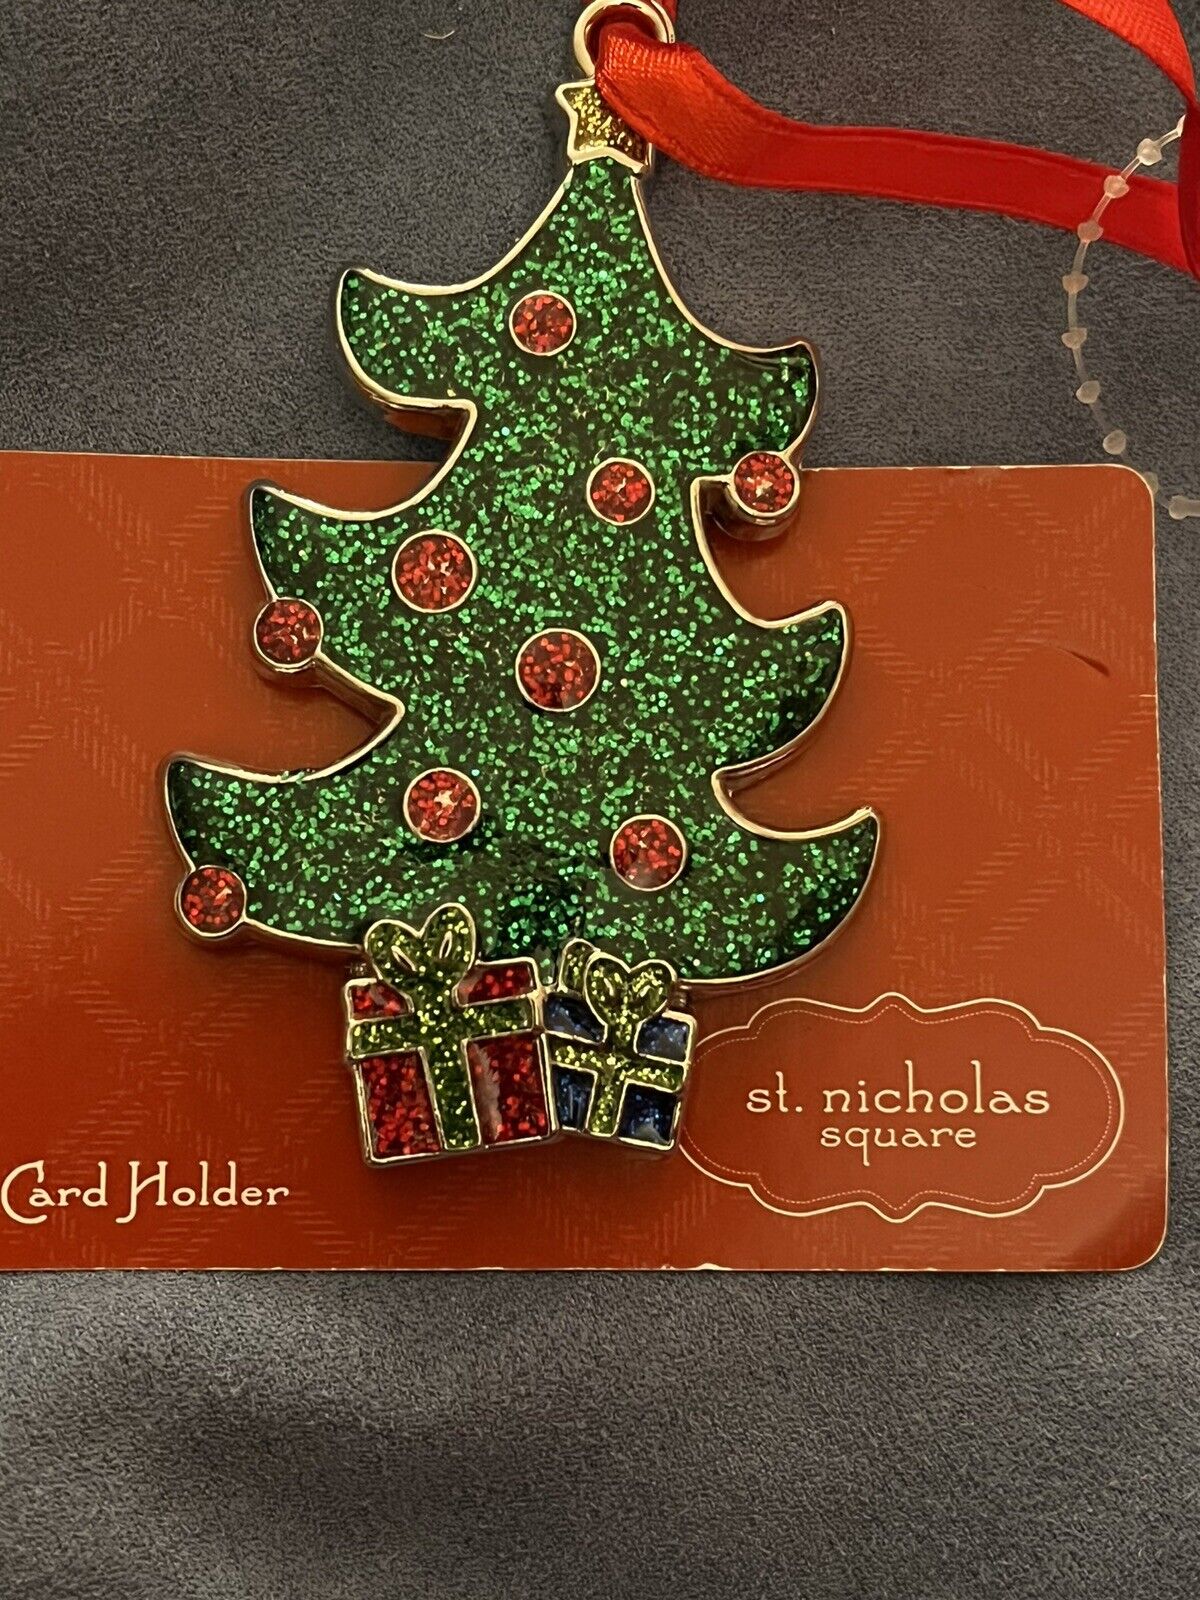 St. Nicolas square CHRISTMAS TREE GIFT CARD HOLDER And  HOLIDAY ORNAMENT